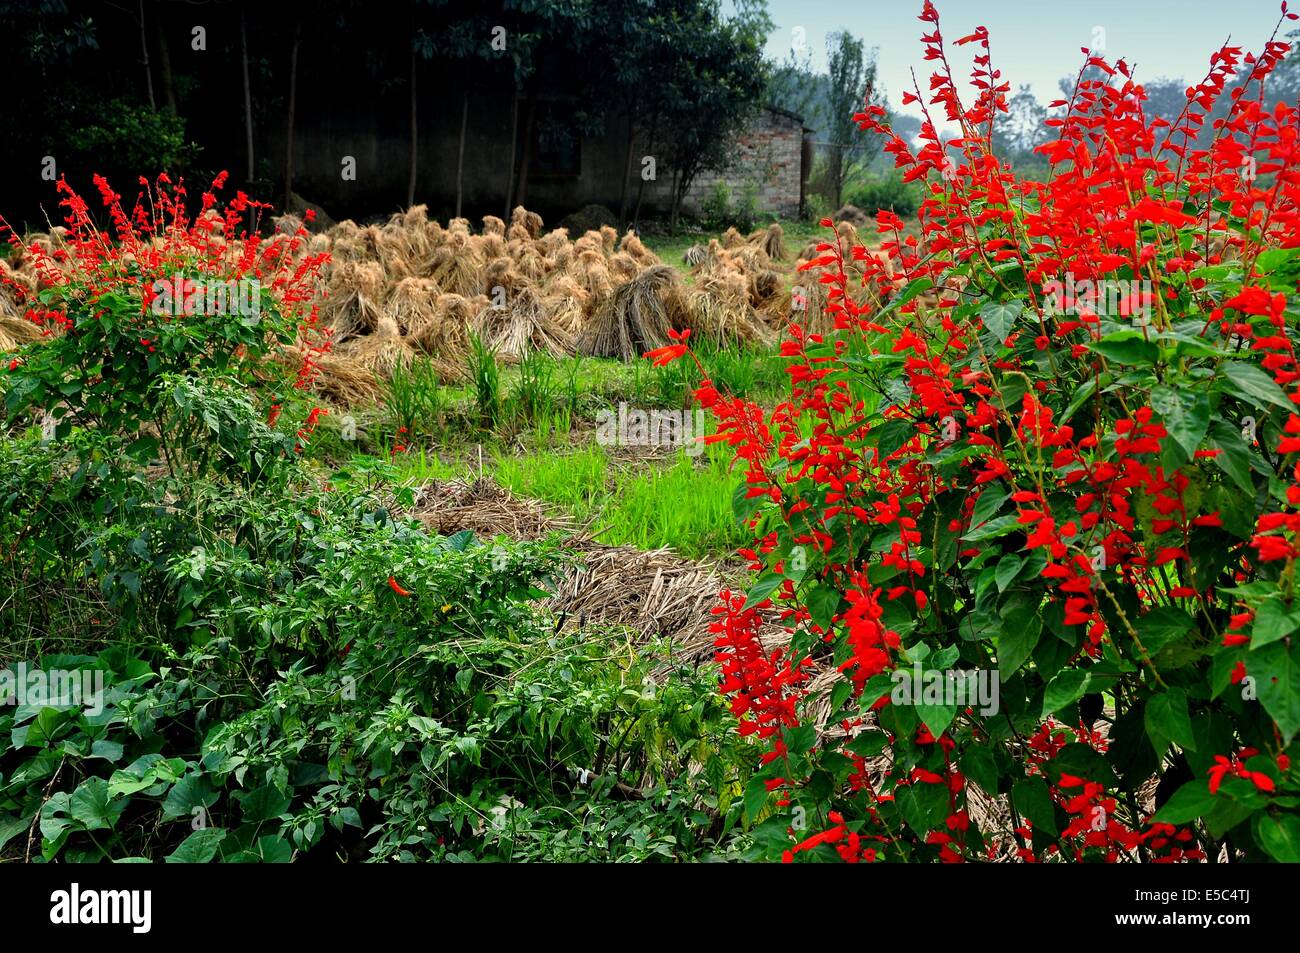 PENGZHOU, CHINA:  Red Salvia flowers frame a field of bundled rice stalk plants left to dry in the sunshine Stock Photo